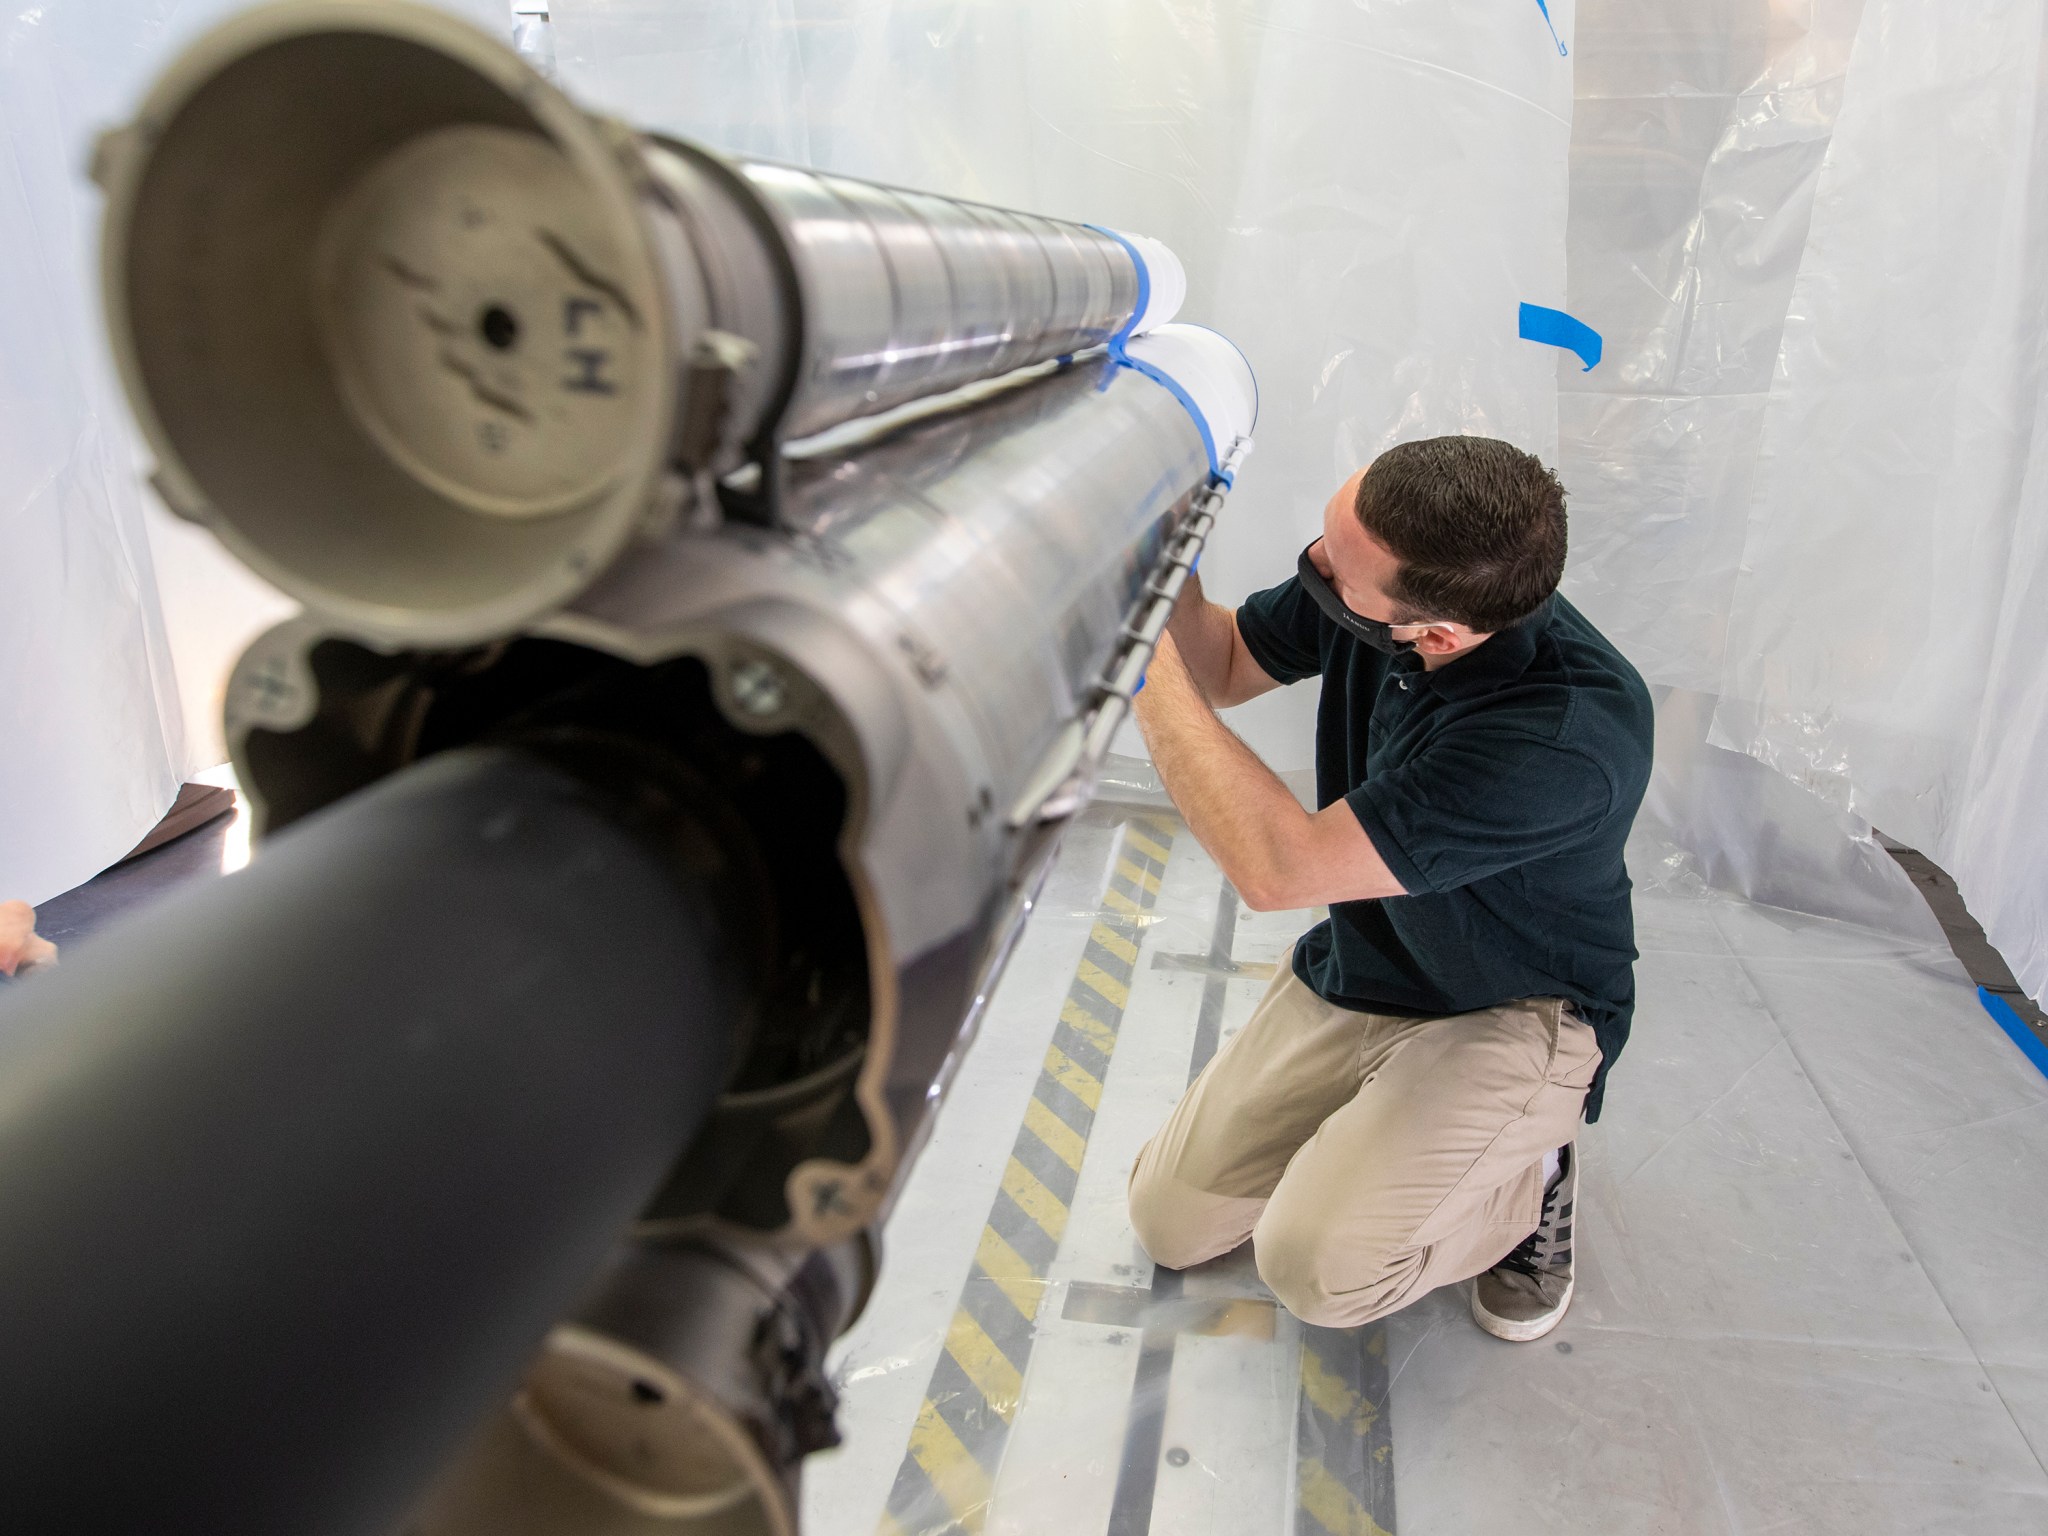 Engineer works on an SLS model in the NTF